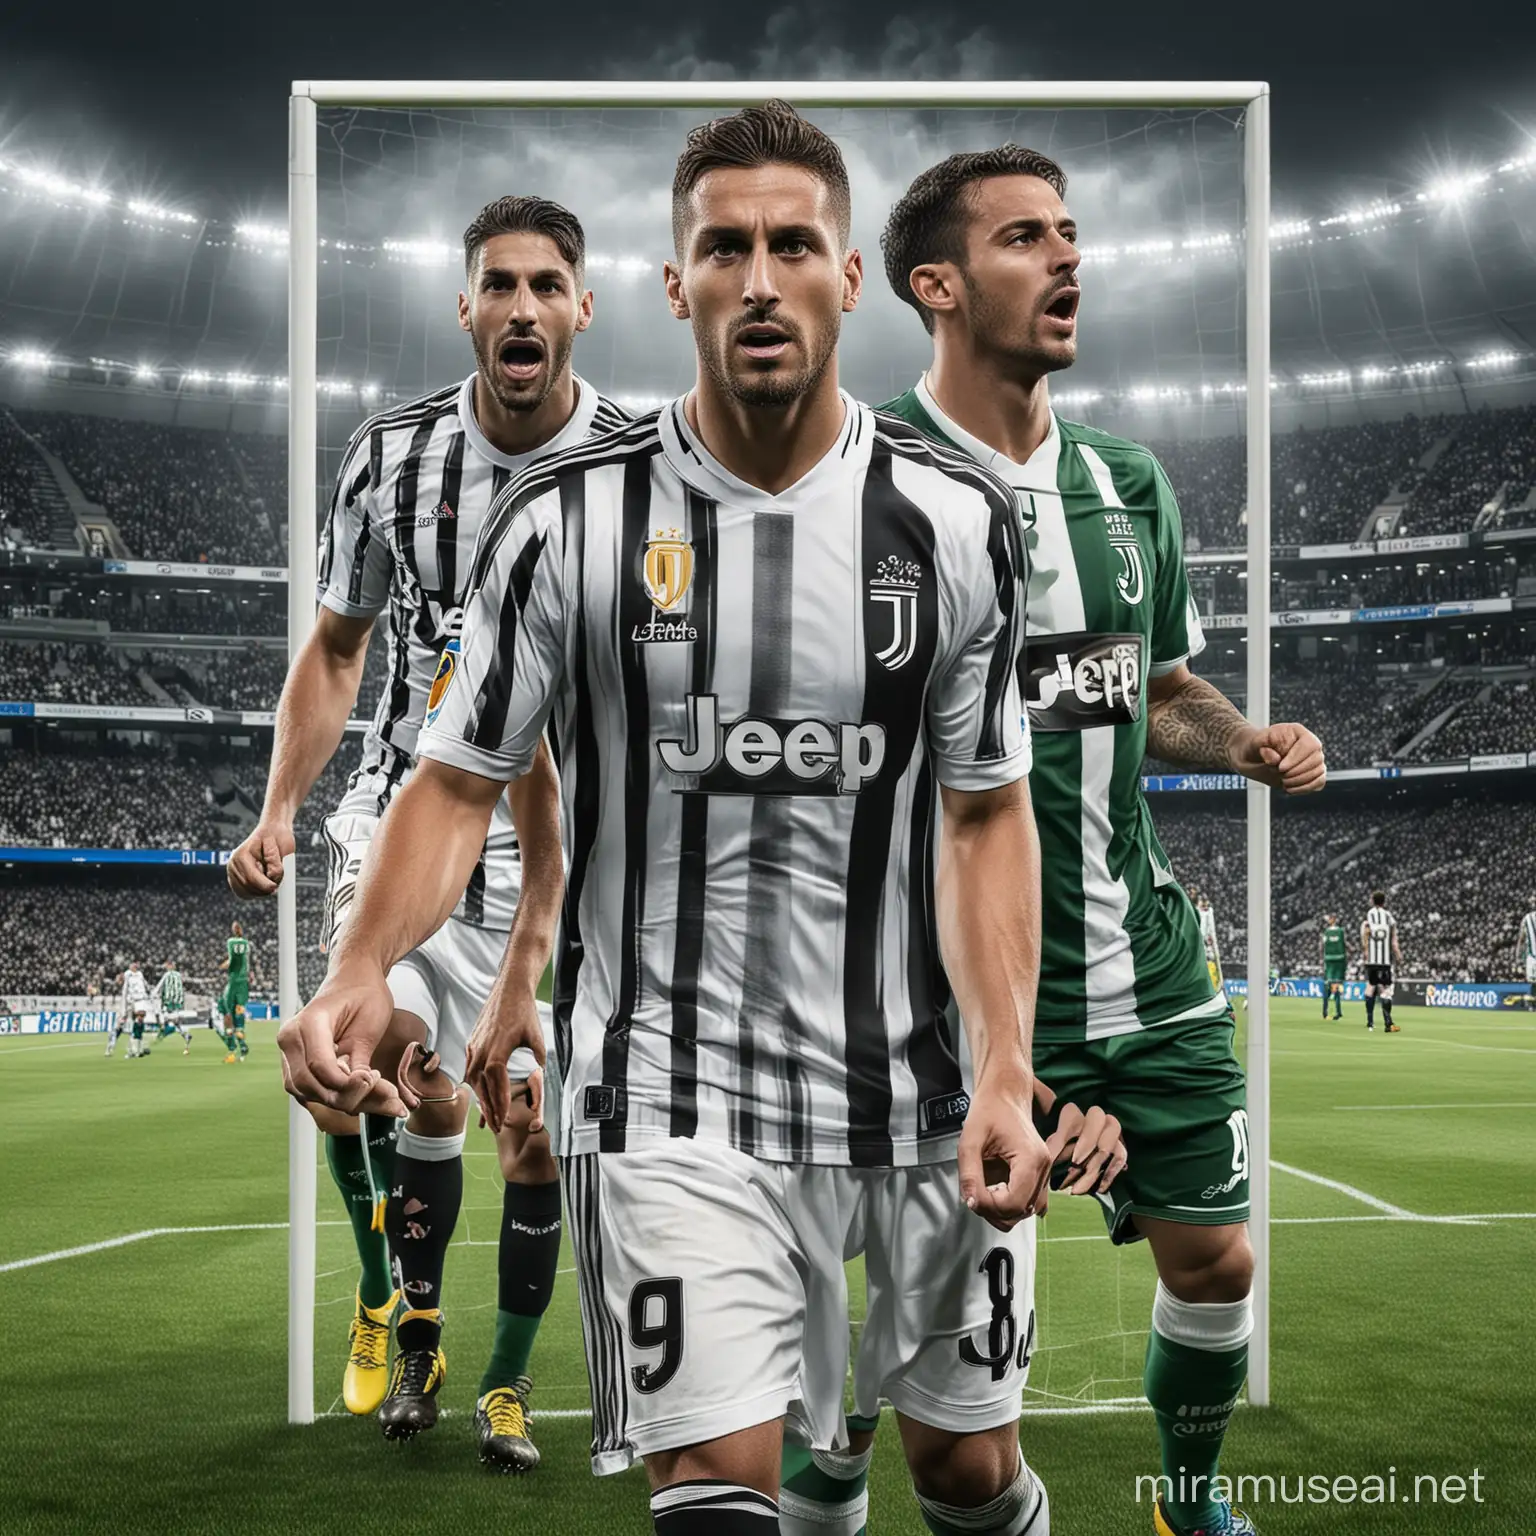 Generate a realistic poster for the advertisement of Juventus vs Sassuolo Serie A match at the Allianz Stadium